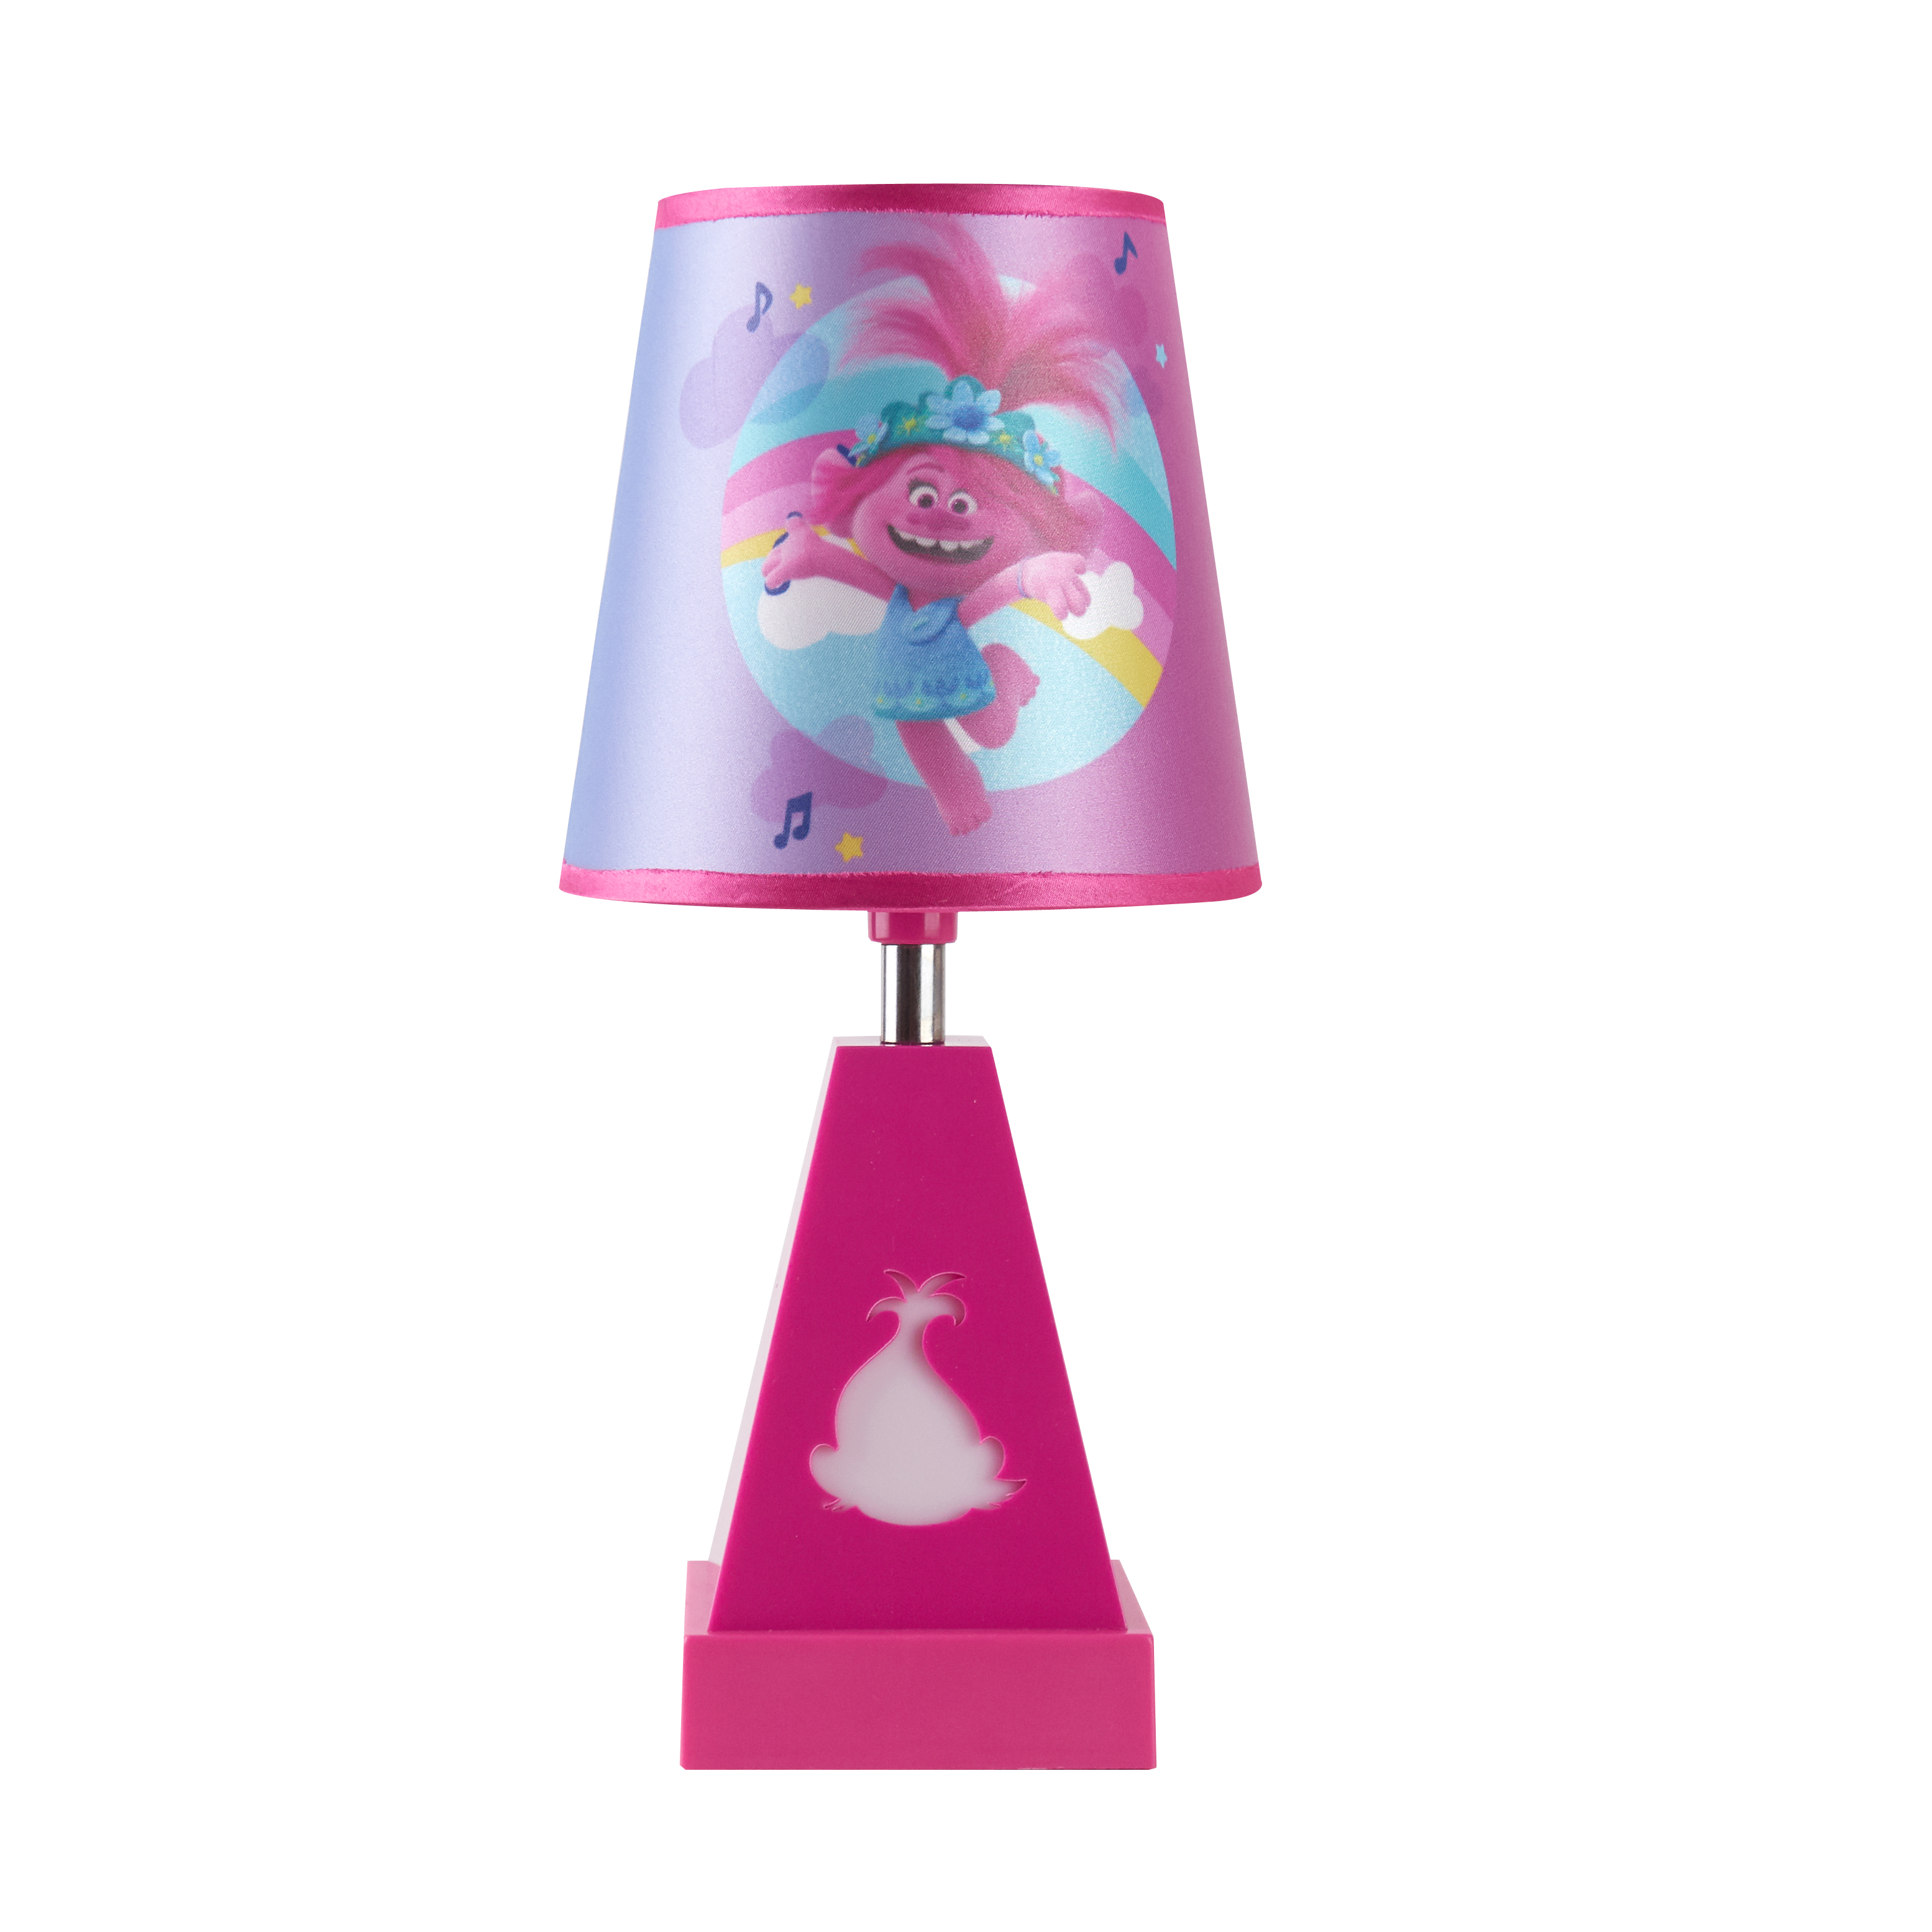 Dreamworks Trolls 2 in 1 Kids Lamp with Night Light - image 1 of 6